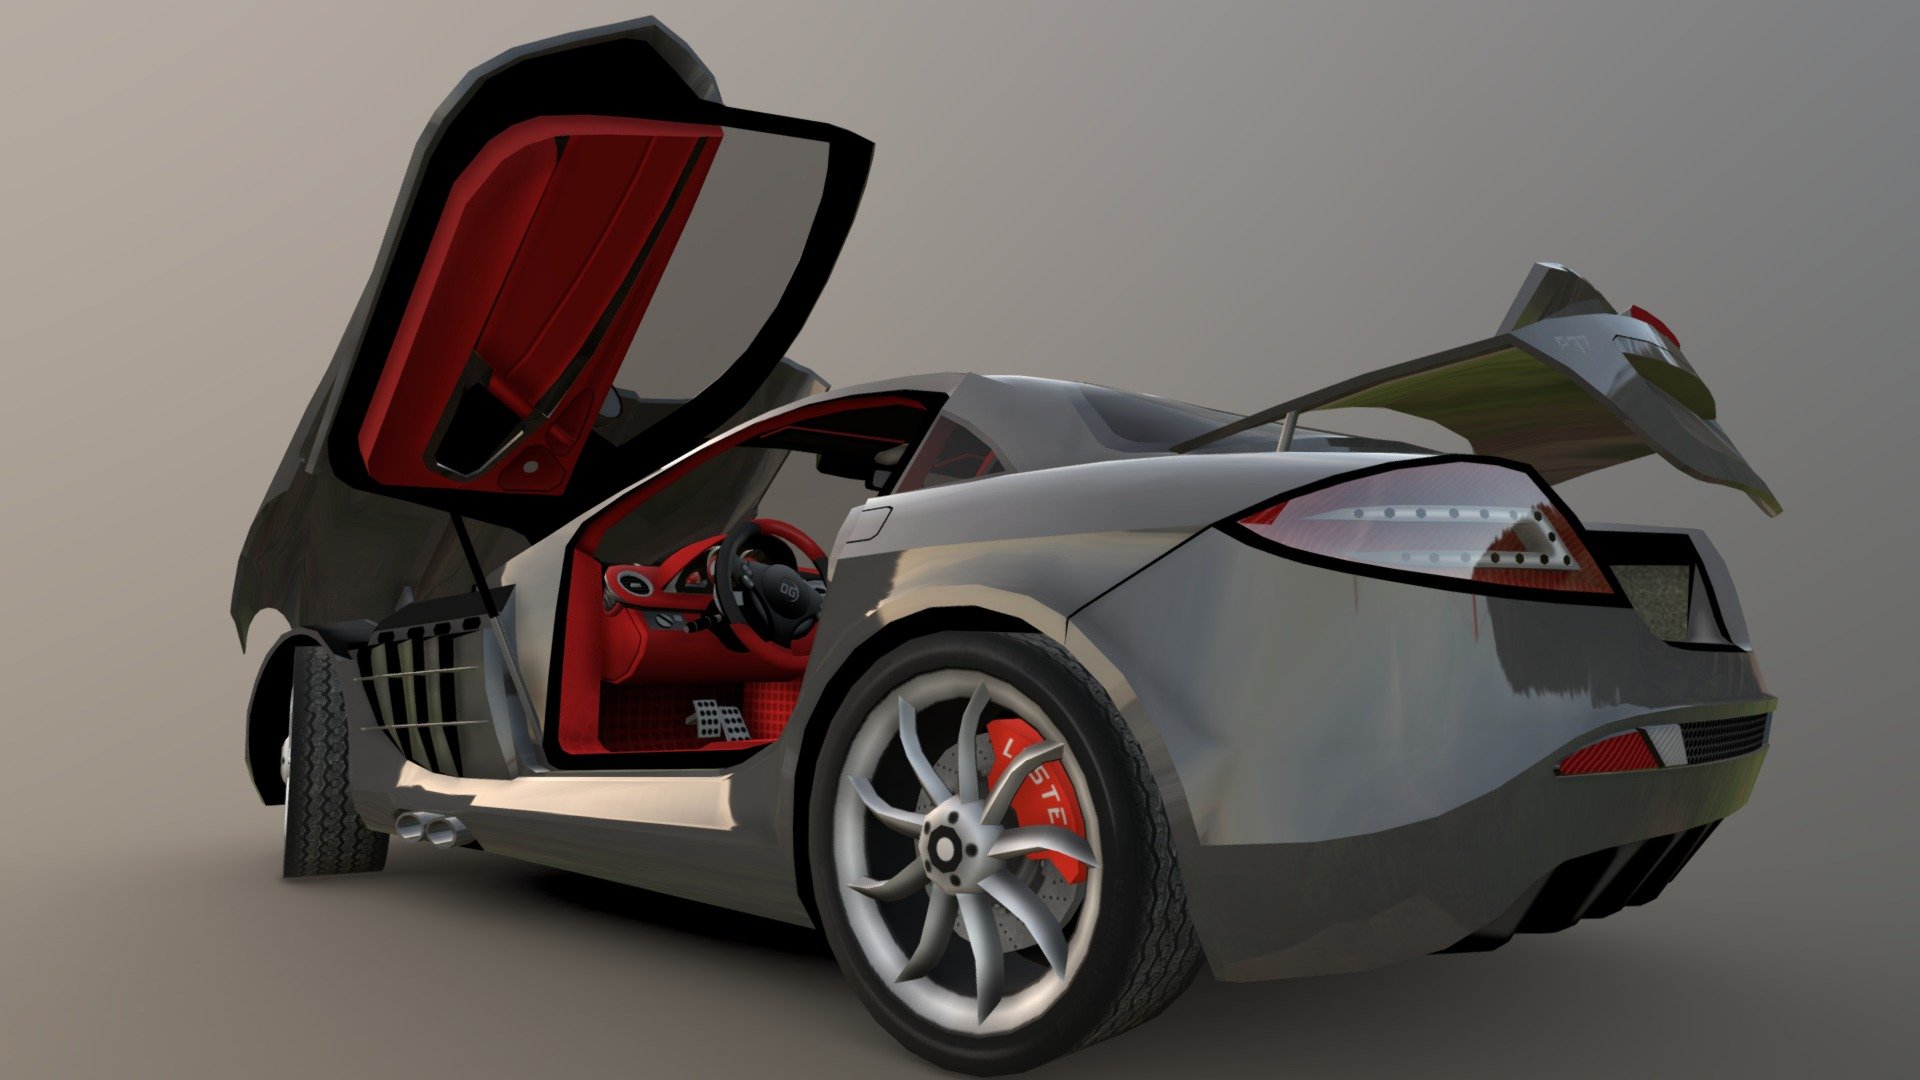 Low poly model for mobile game with interrior and moving parts
30 objects
12k verts
20.2k triangles
11.2k polygons
Textures 256x256 to 2048x2048
Created in blender3d 2021 - Mercedes McLaren SLR - 3D model by OG Cars (@zigzag977010) 3d model